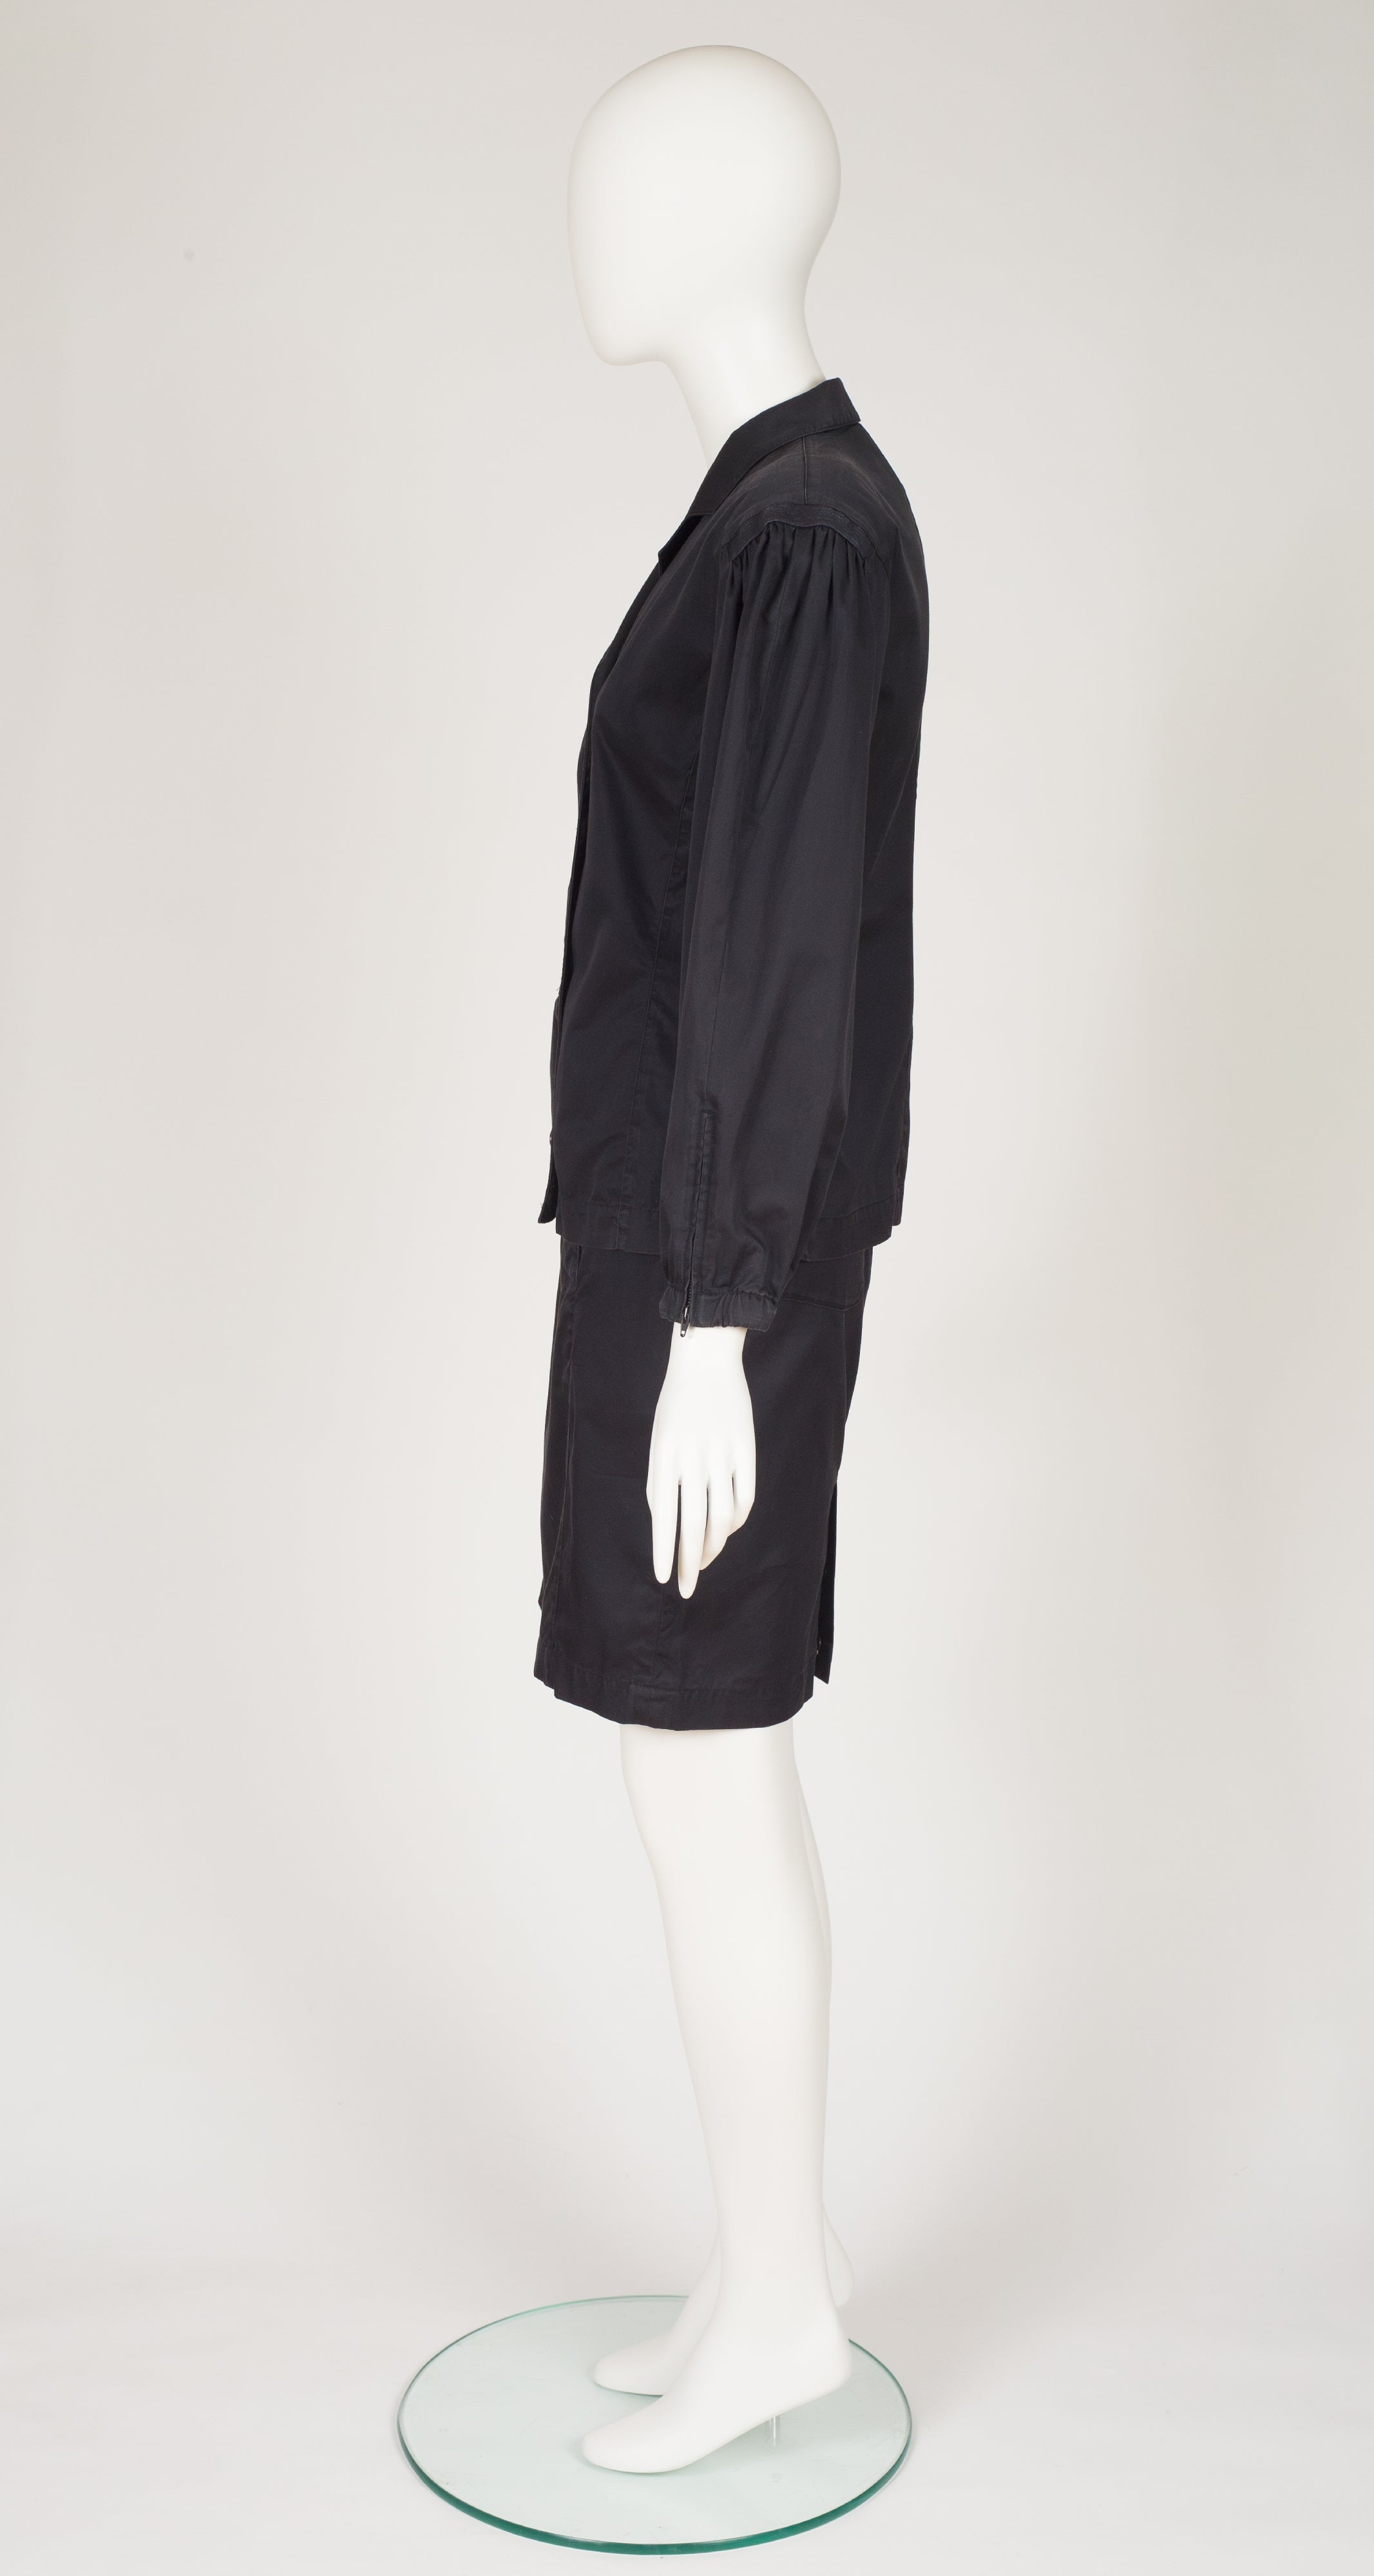 1980s Black Cotton Double-Breasted Skirt Suit